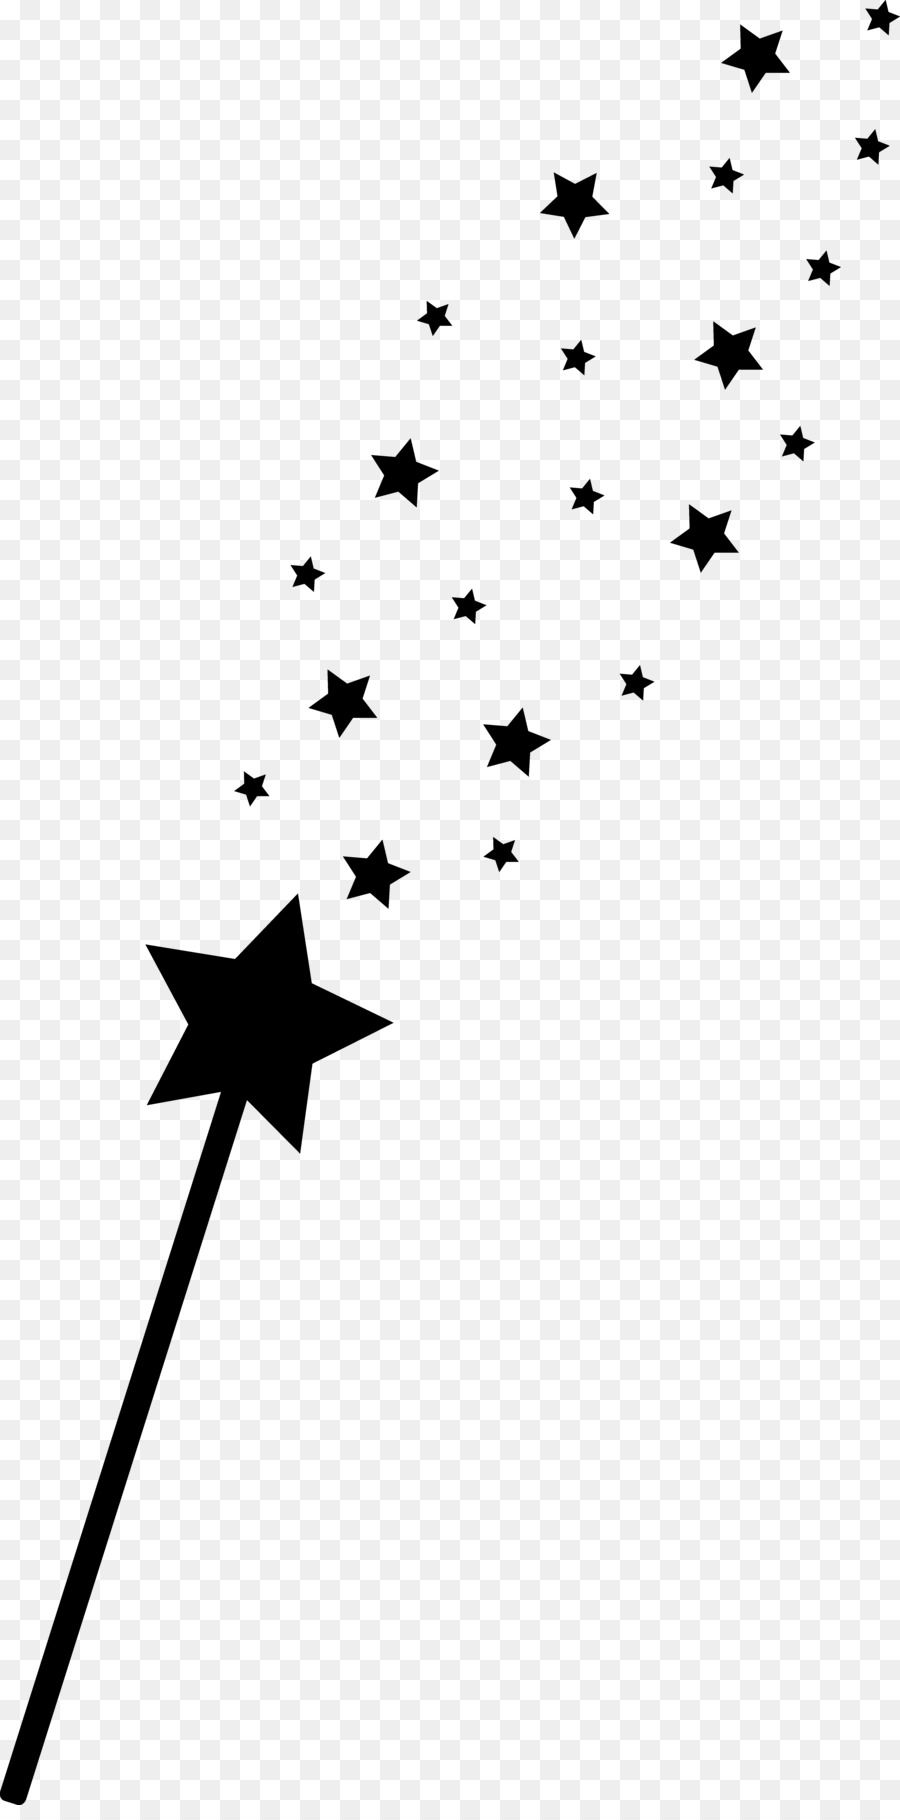 Wand Fairy Magic Clip art - Stars Silhouette png download - 5311*10653 - Free Transparent Wand png Download.